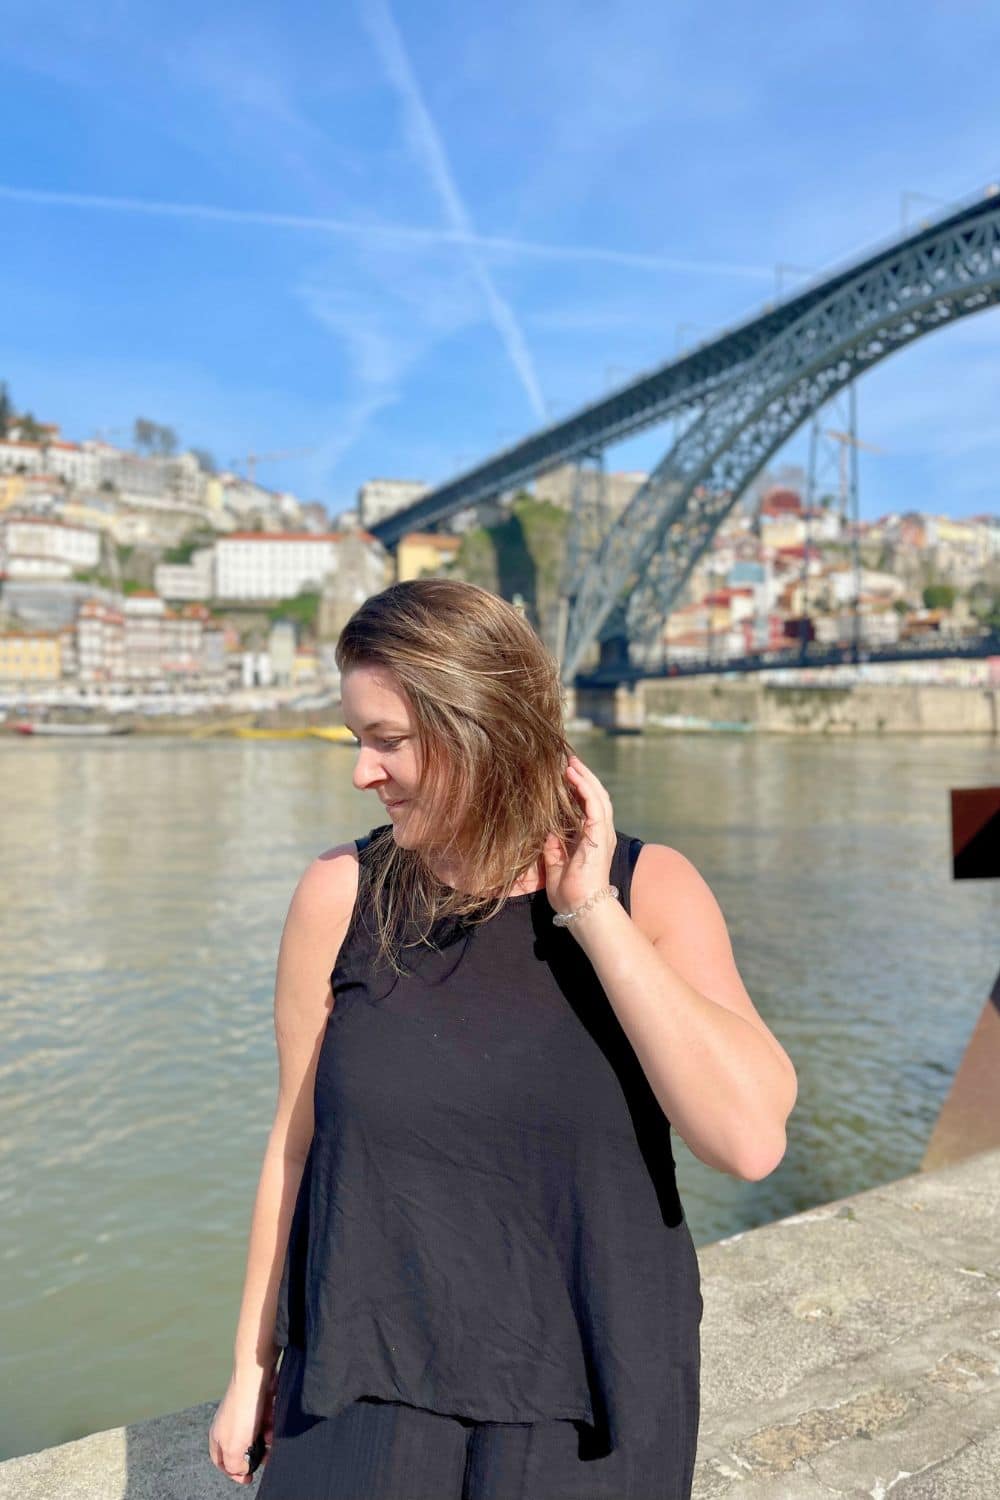 A woman standing alone in Porto with the River and bridge in the background.